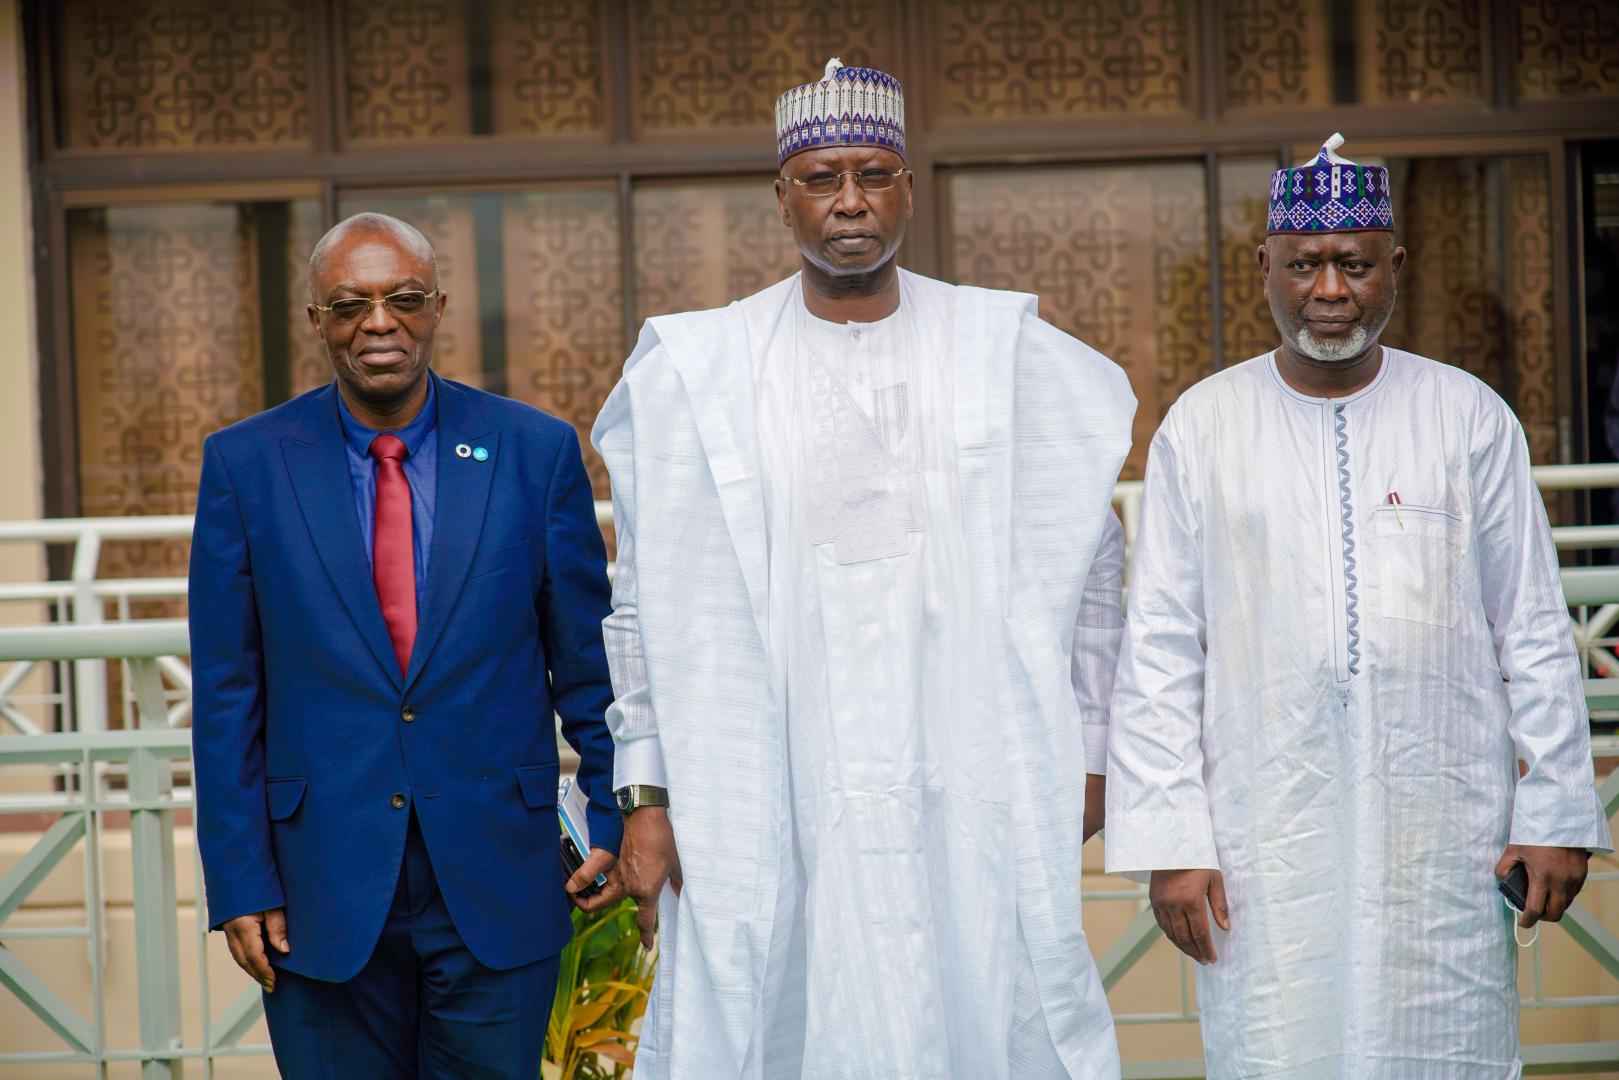 The WR with the SGF and NHIA DG.jpg